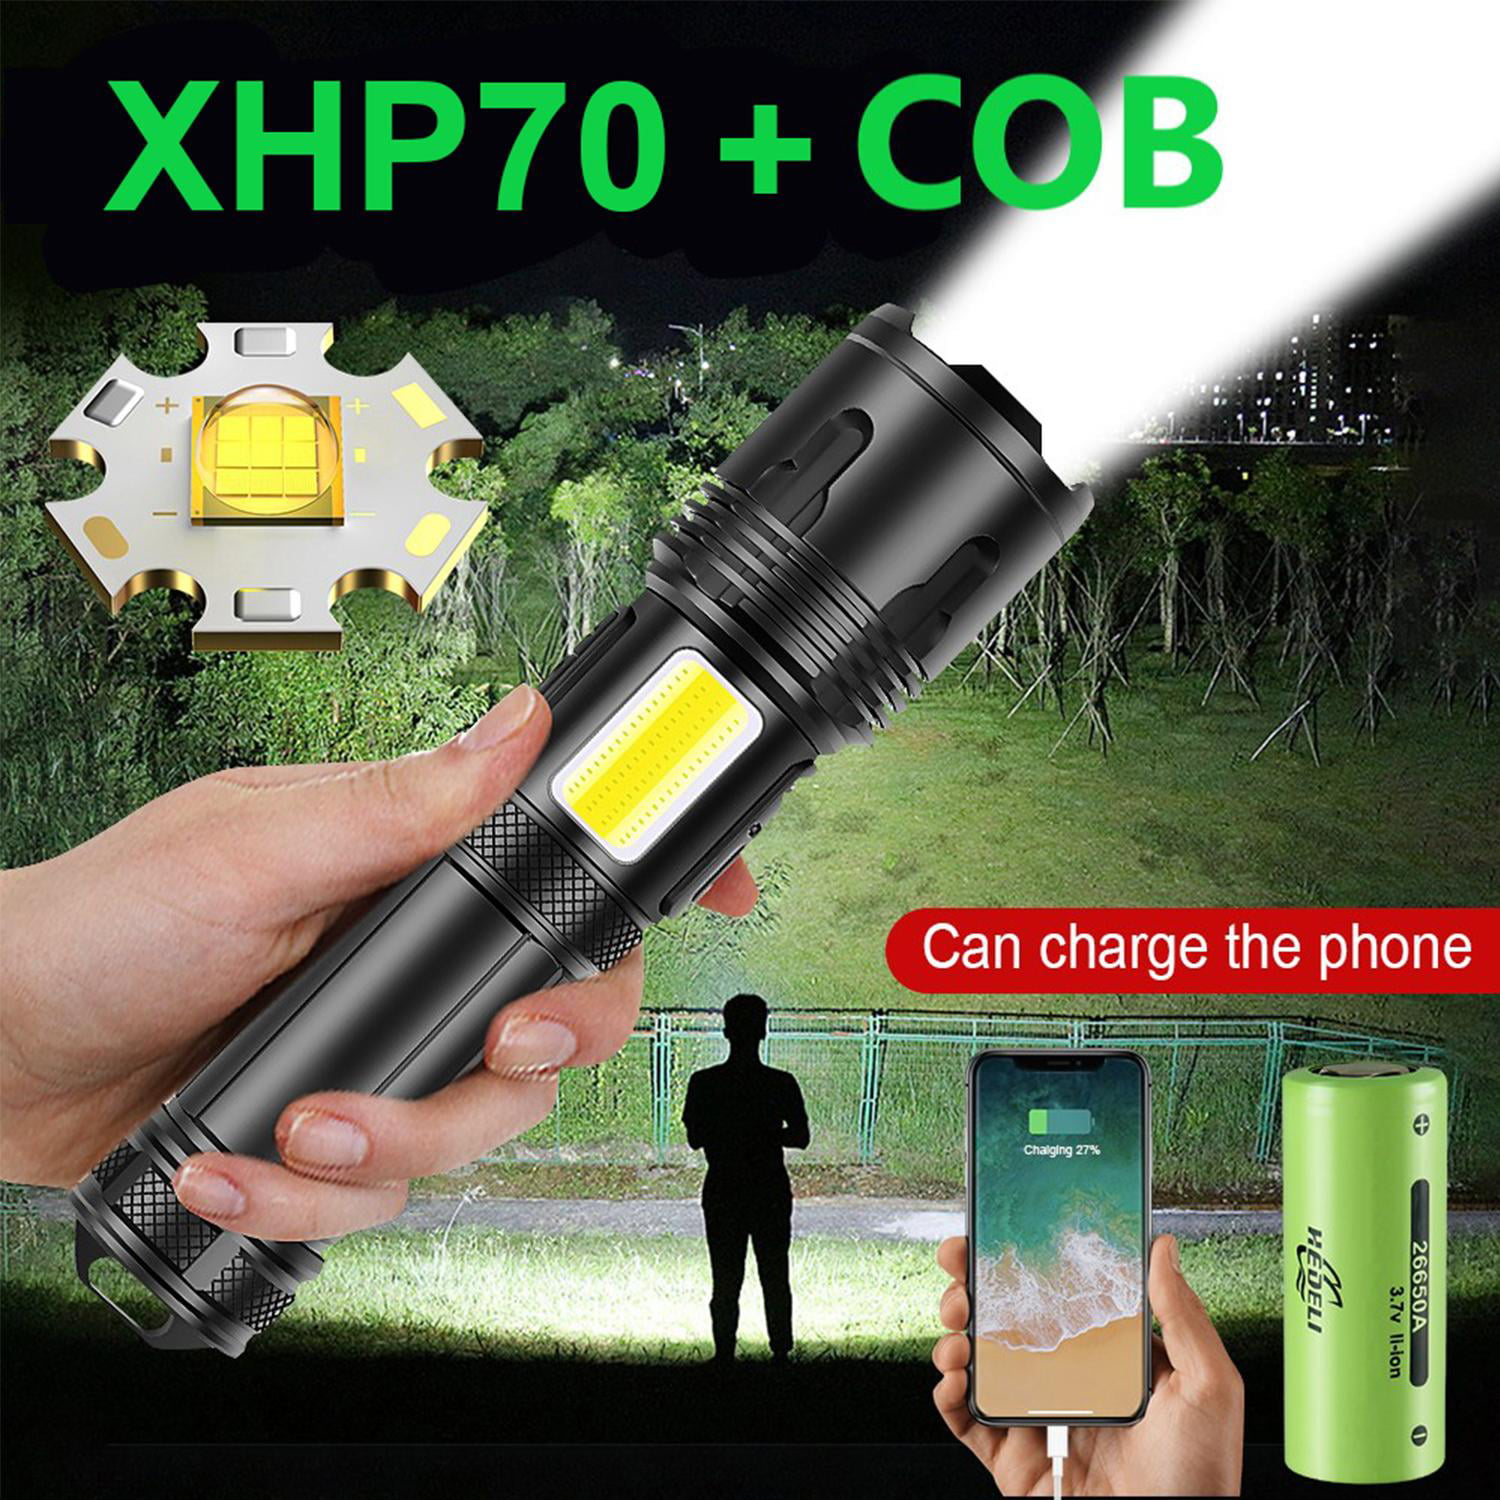 USB Rechargeable LUXJUMPER LED Tactical Flashlight XHP70-7100 High Lumen High-Powered Flashlights 5 Modes Waterproof Searchlight Torch Best for Outdoor or Home Emergency 